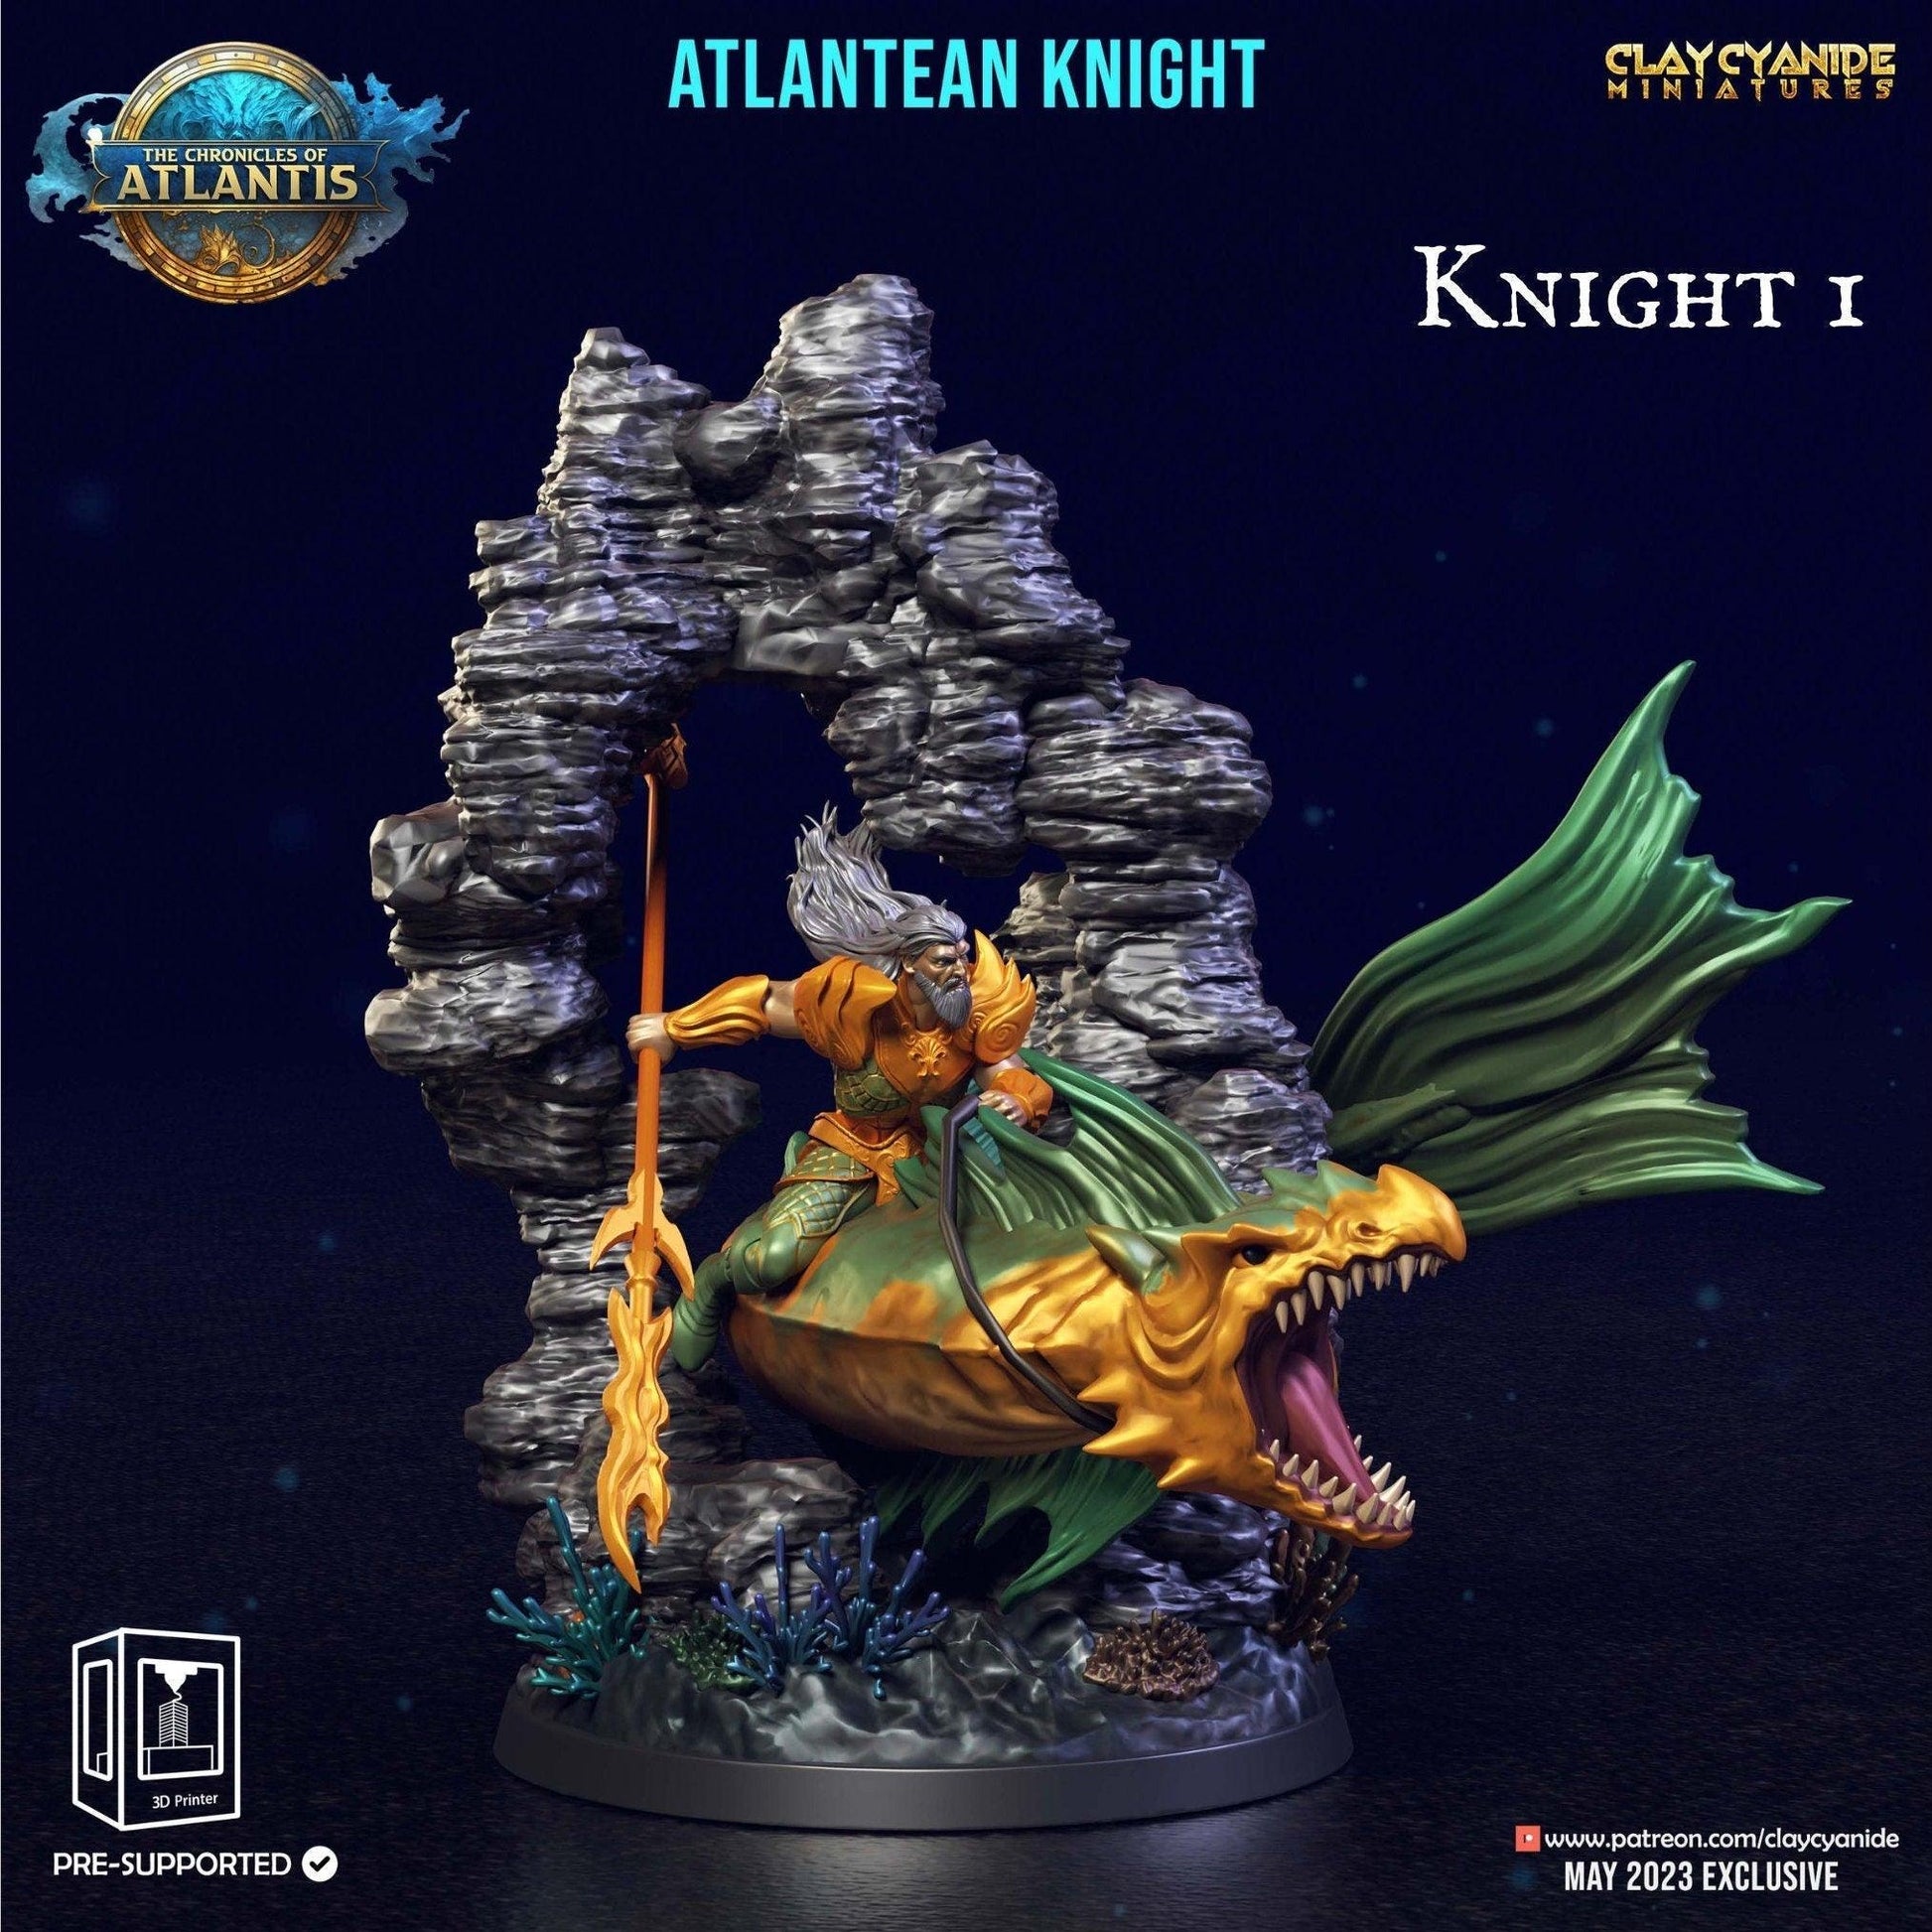 Atlantean DnD Knight Miniature | Clay Cyanide | Chronicles of Atlantis | DnD Miniature Dungeons and Dragons DnD 5e Underwater Knight - Plague Miniatures shop for DnD Miniatures